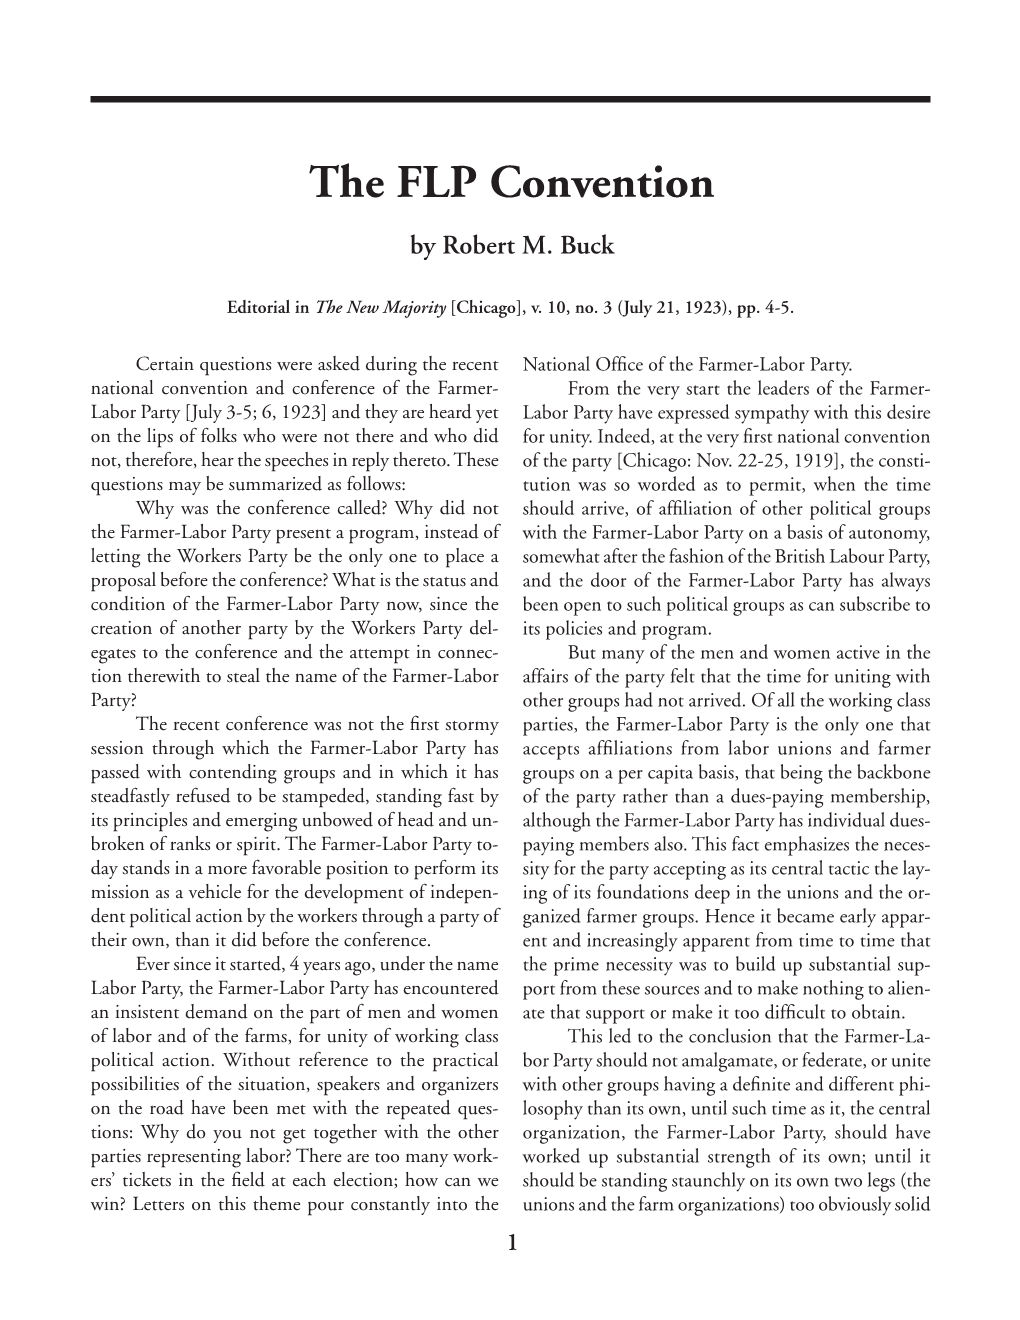 The FLP Convention [July 21, 1923] 1